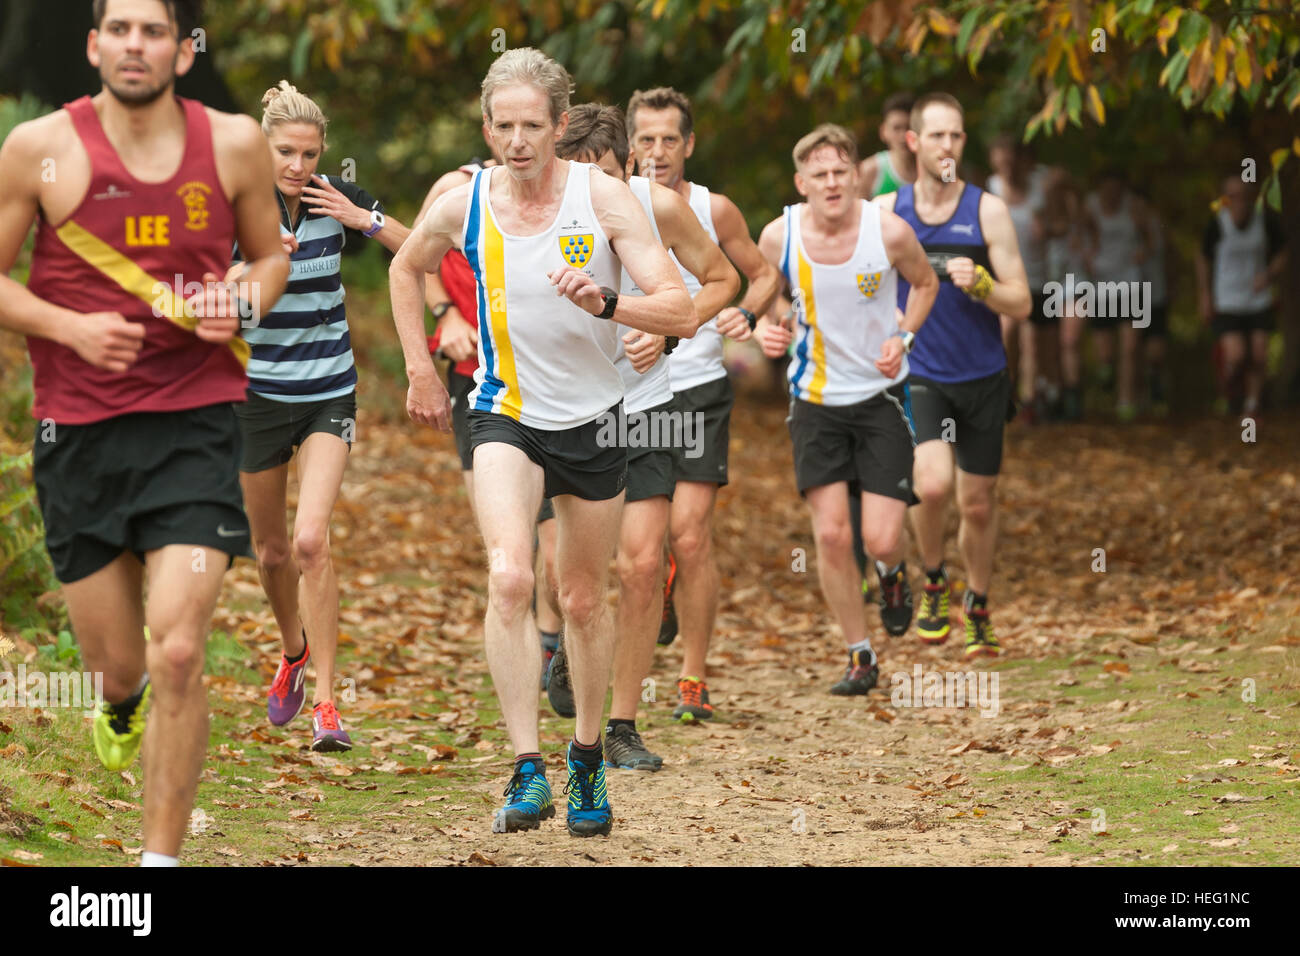 First race of Season Kent fitness running league race in Knole Park massive field cross country 561 runners teams Stock Photo